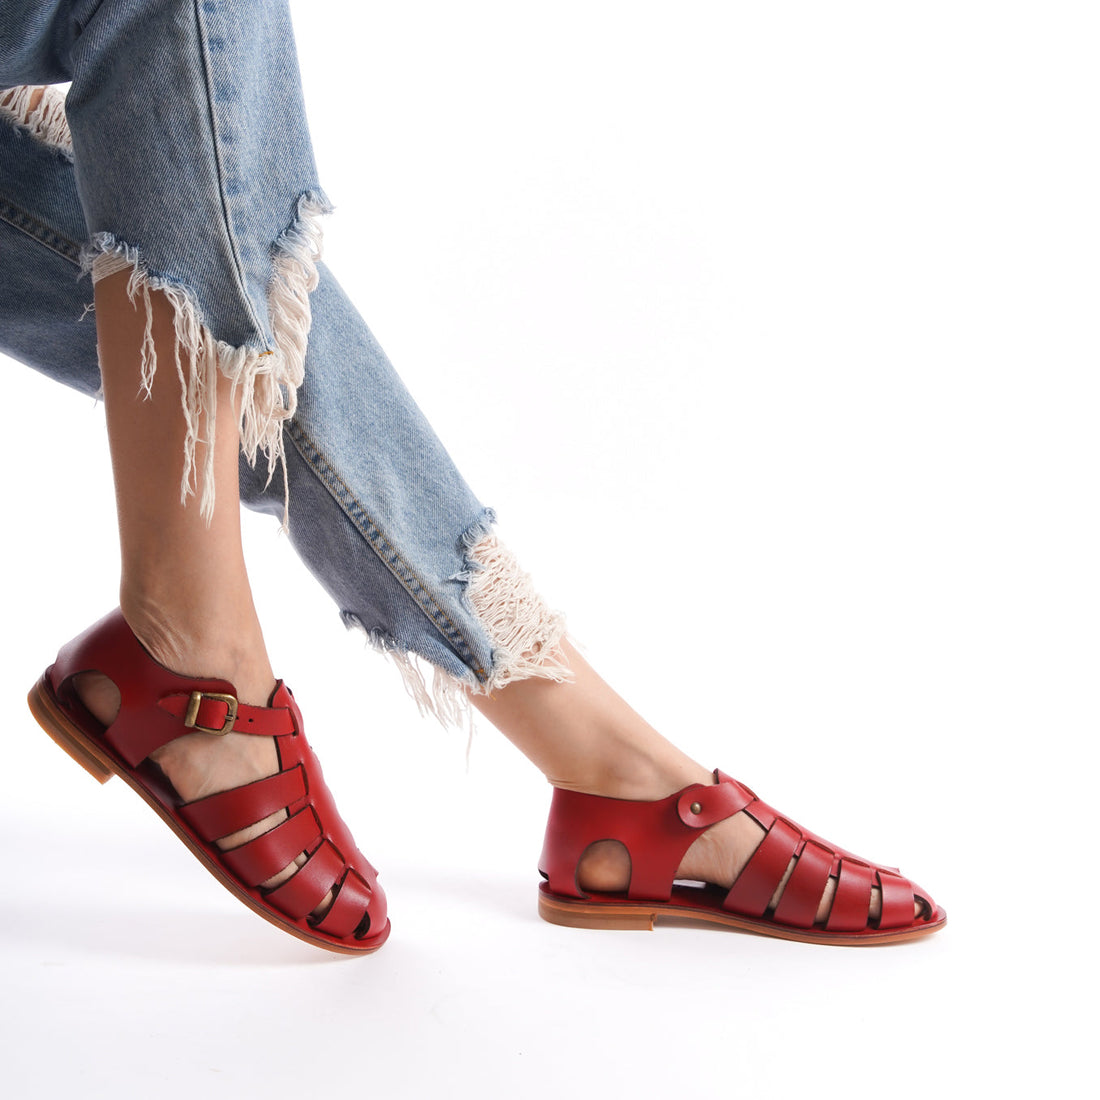 Women’s Closed Toe Red Fisherman Leather Flat Sandals